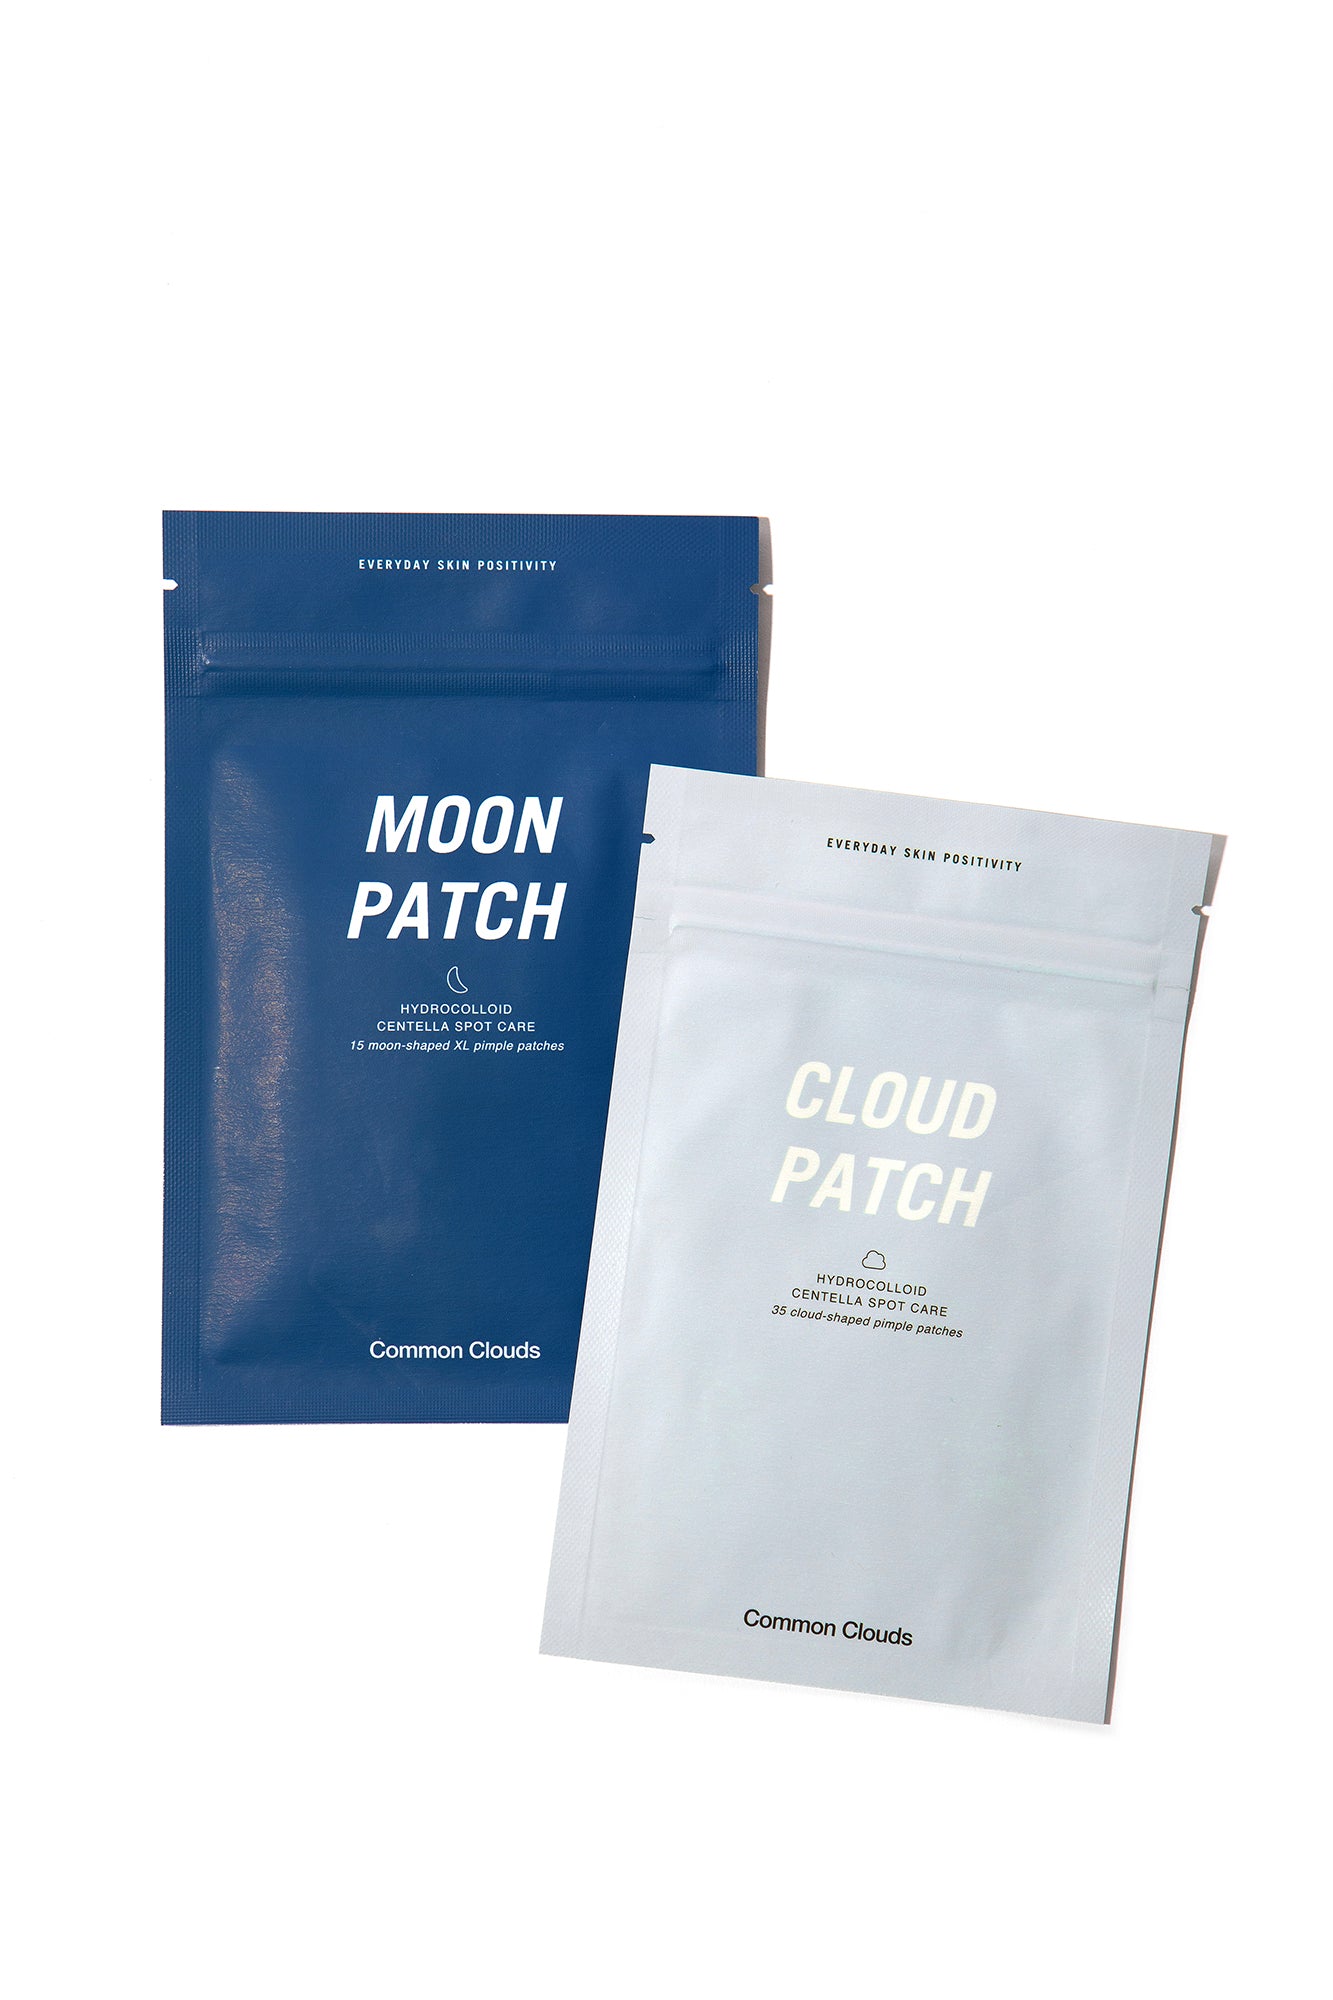 Dream Duo pimple patches